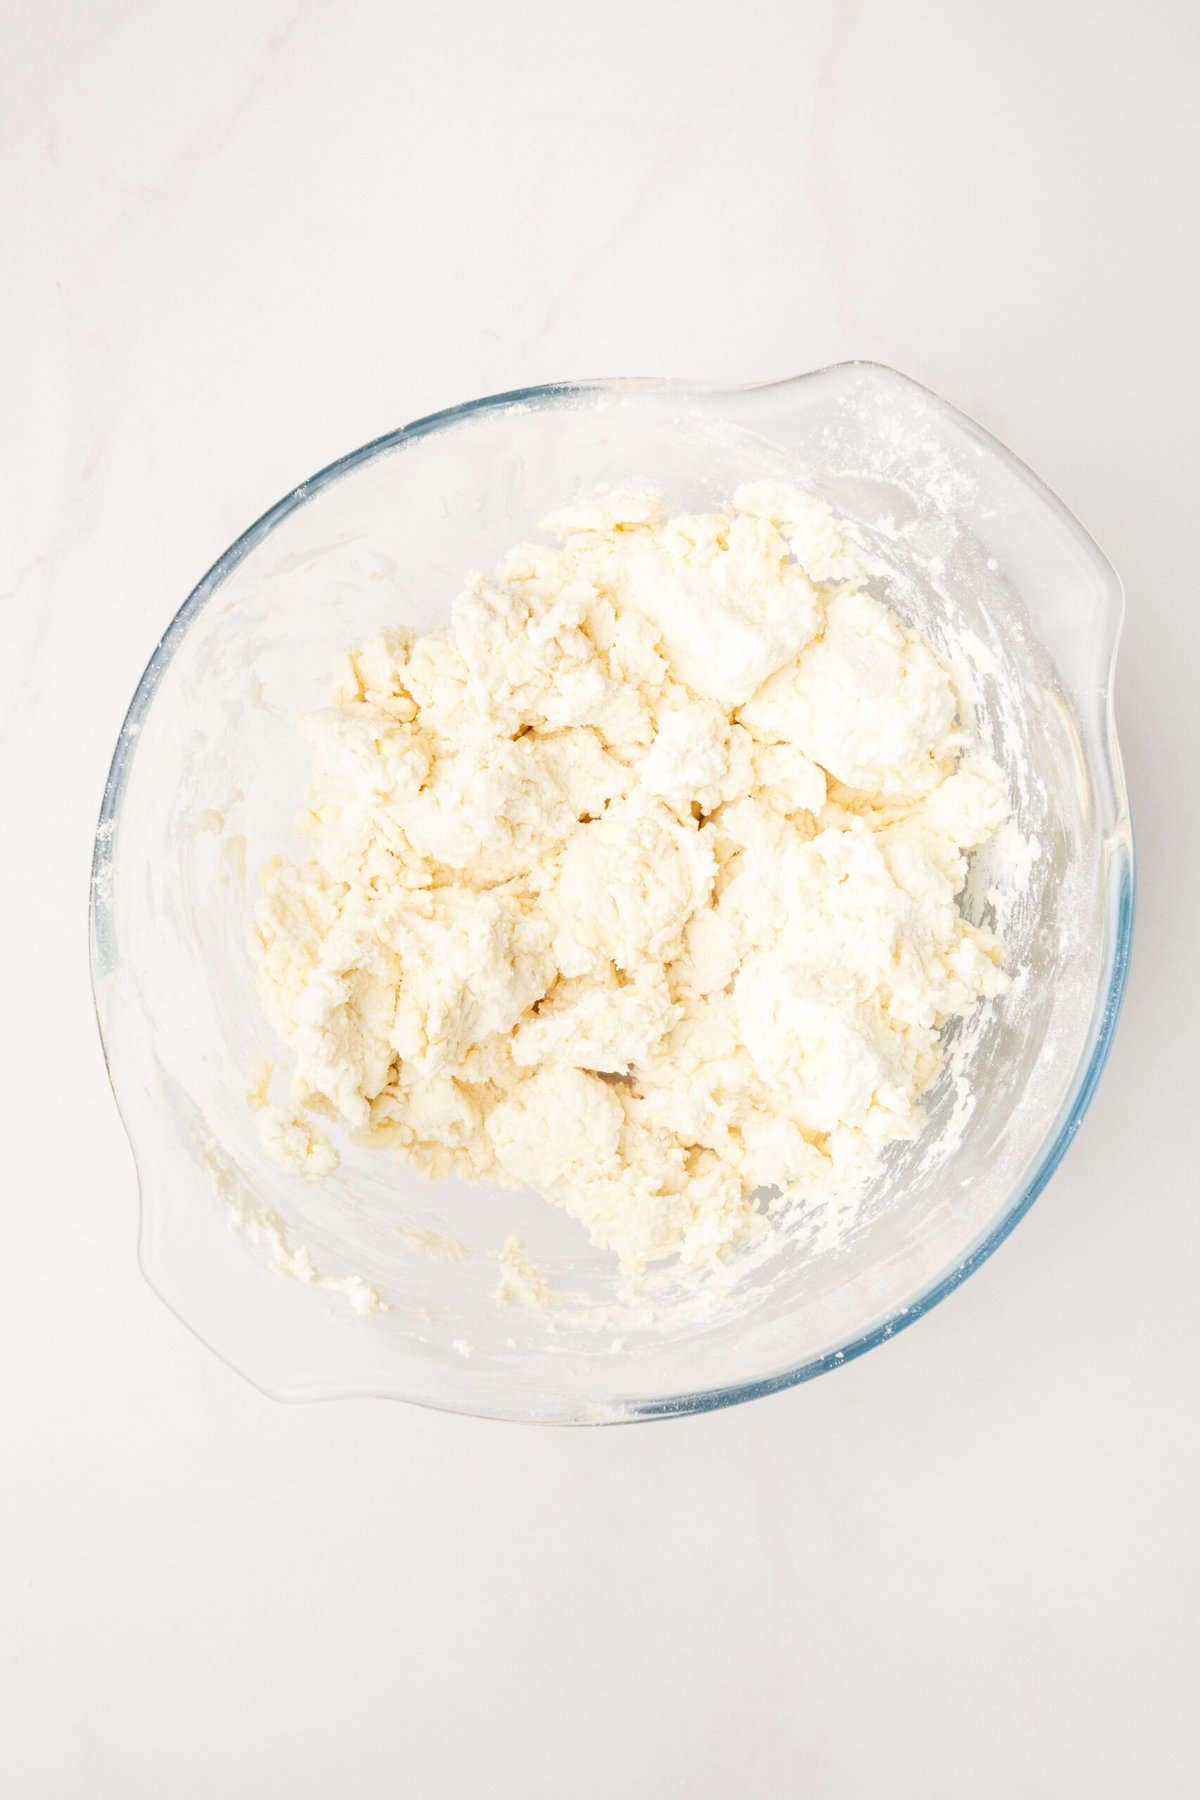 large glass mixing bowl with all-purpose flour mixed into butter.